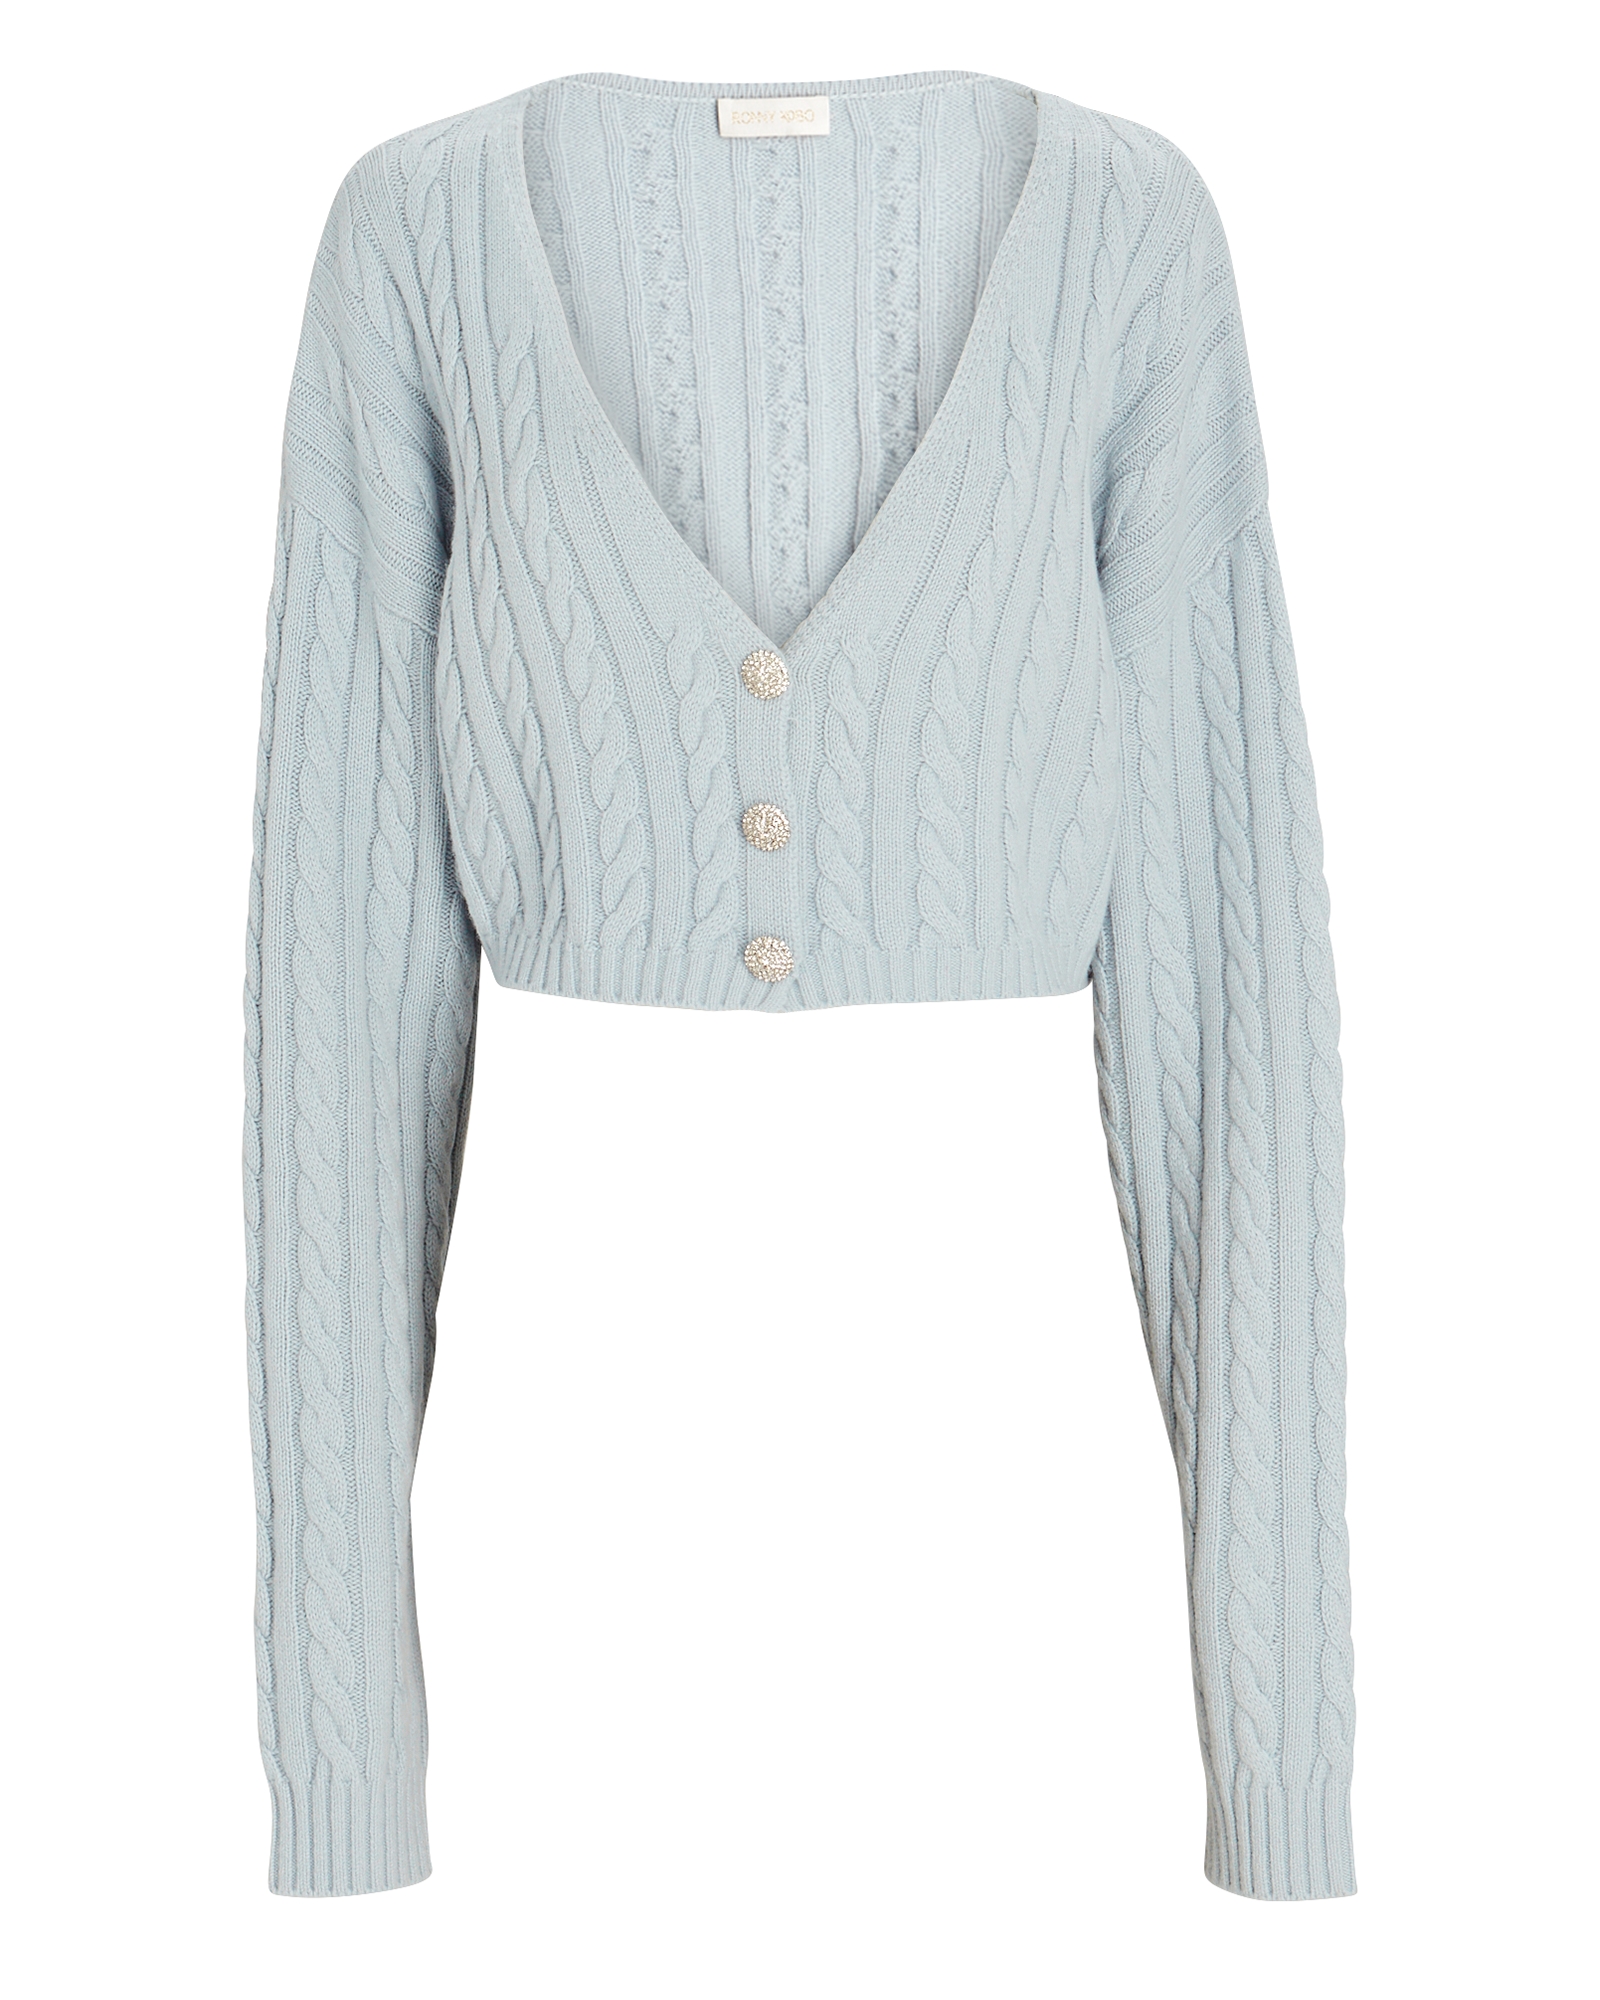 Ronny Kobo Phyllis Cropped Cable Knit Cardigan | INTERMIX®